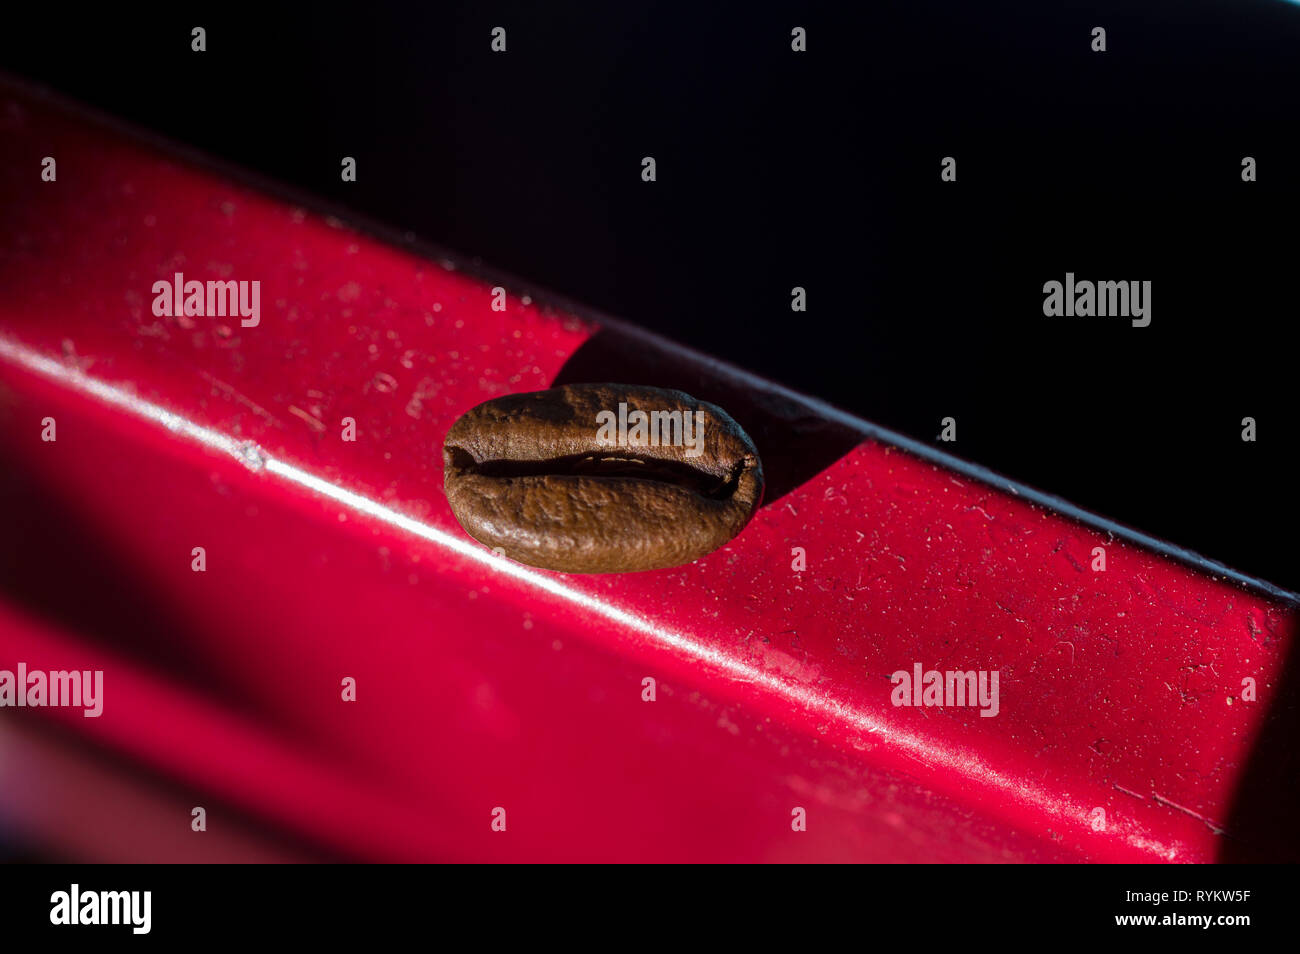 Close up macro photo of one single coffee bean against a single color background Stock Photo